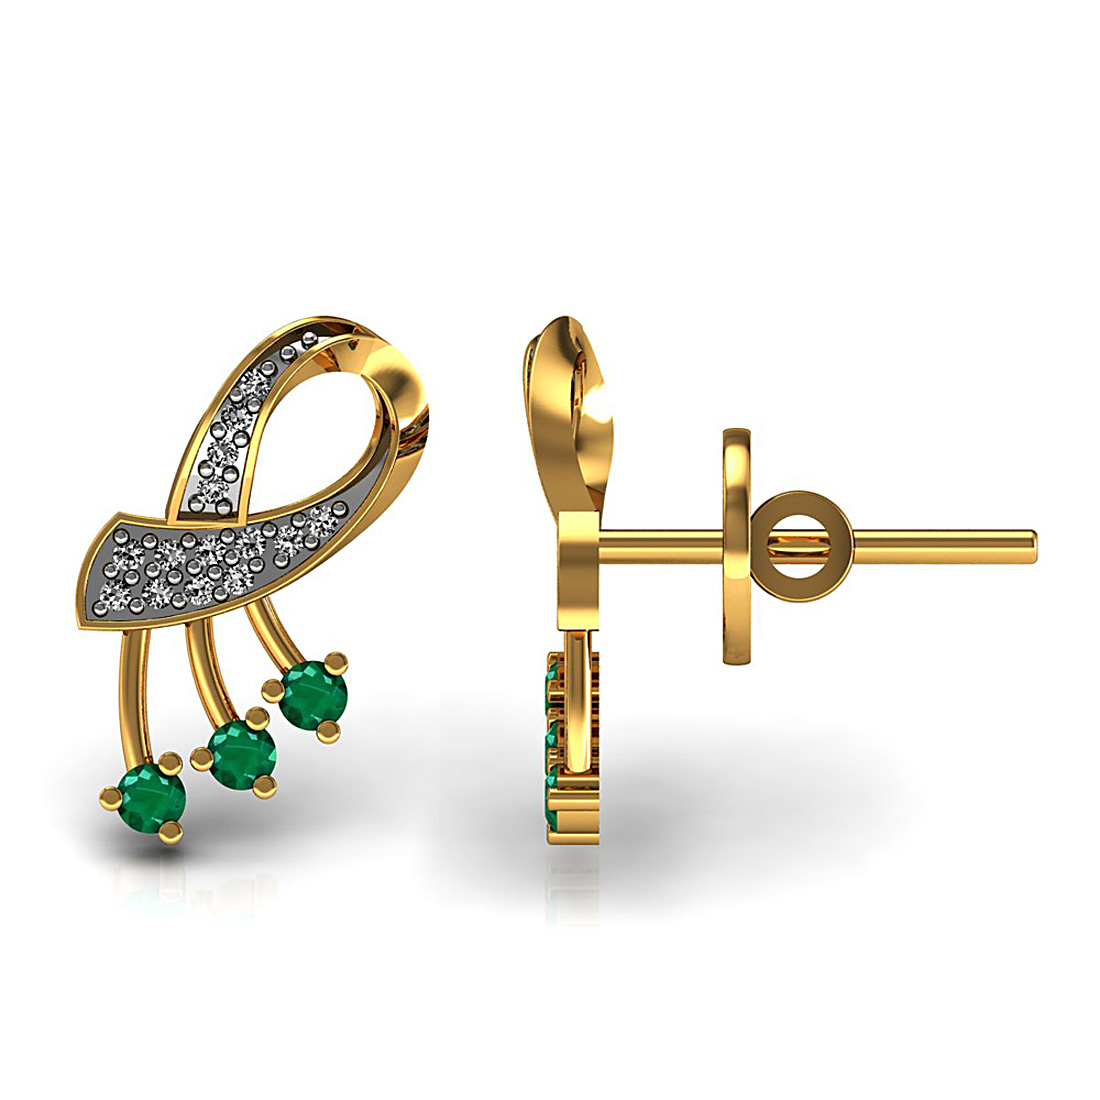 Natural diamond stud earrings made in 18k gold & emerald